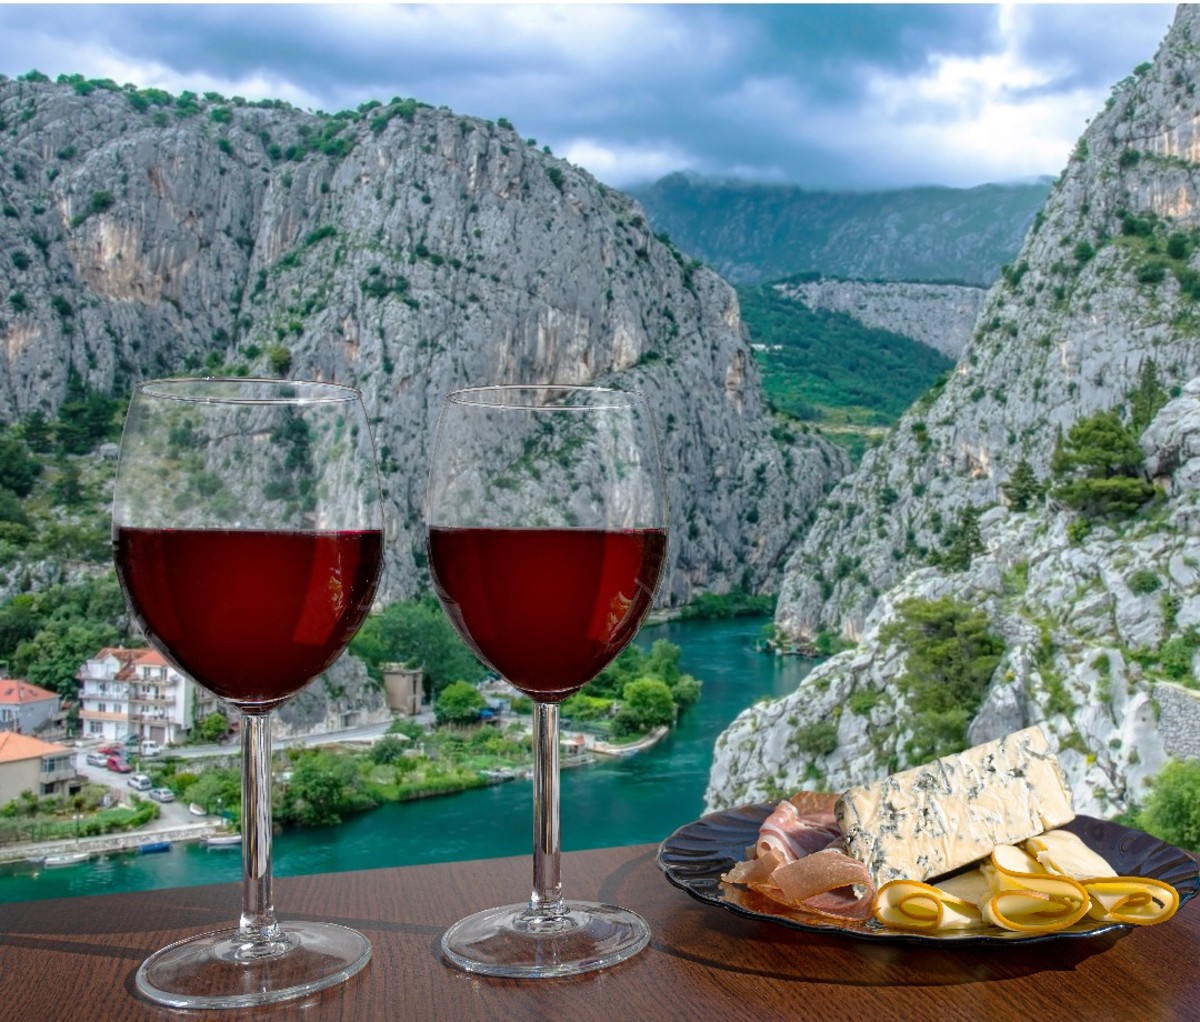 Two glasses of red wine on an outdoor table with a backdrop of the Celina River canyon and old town Omis in Dalmatia region, Croatia